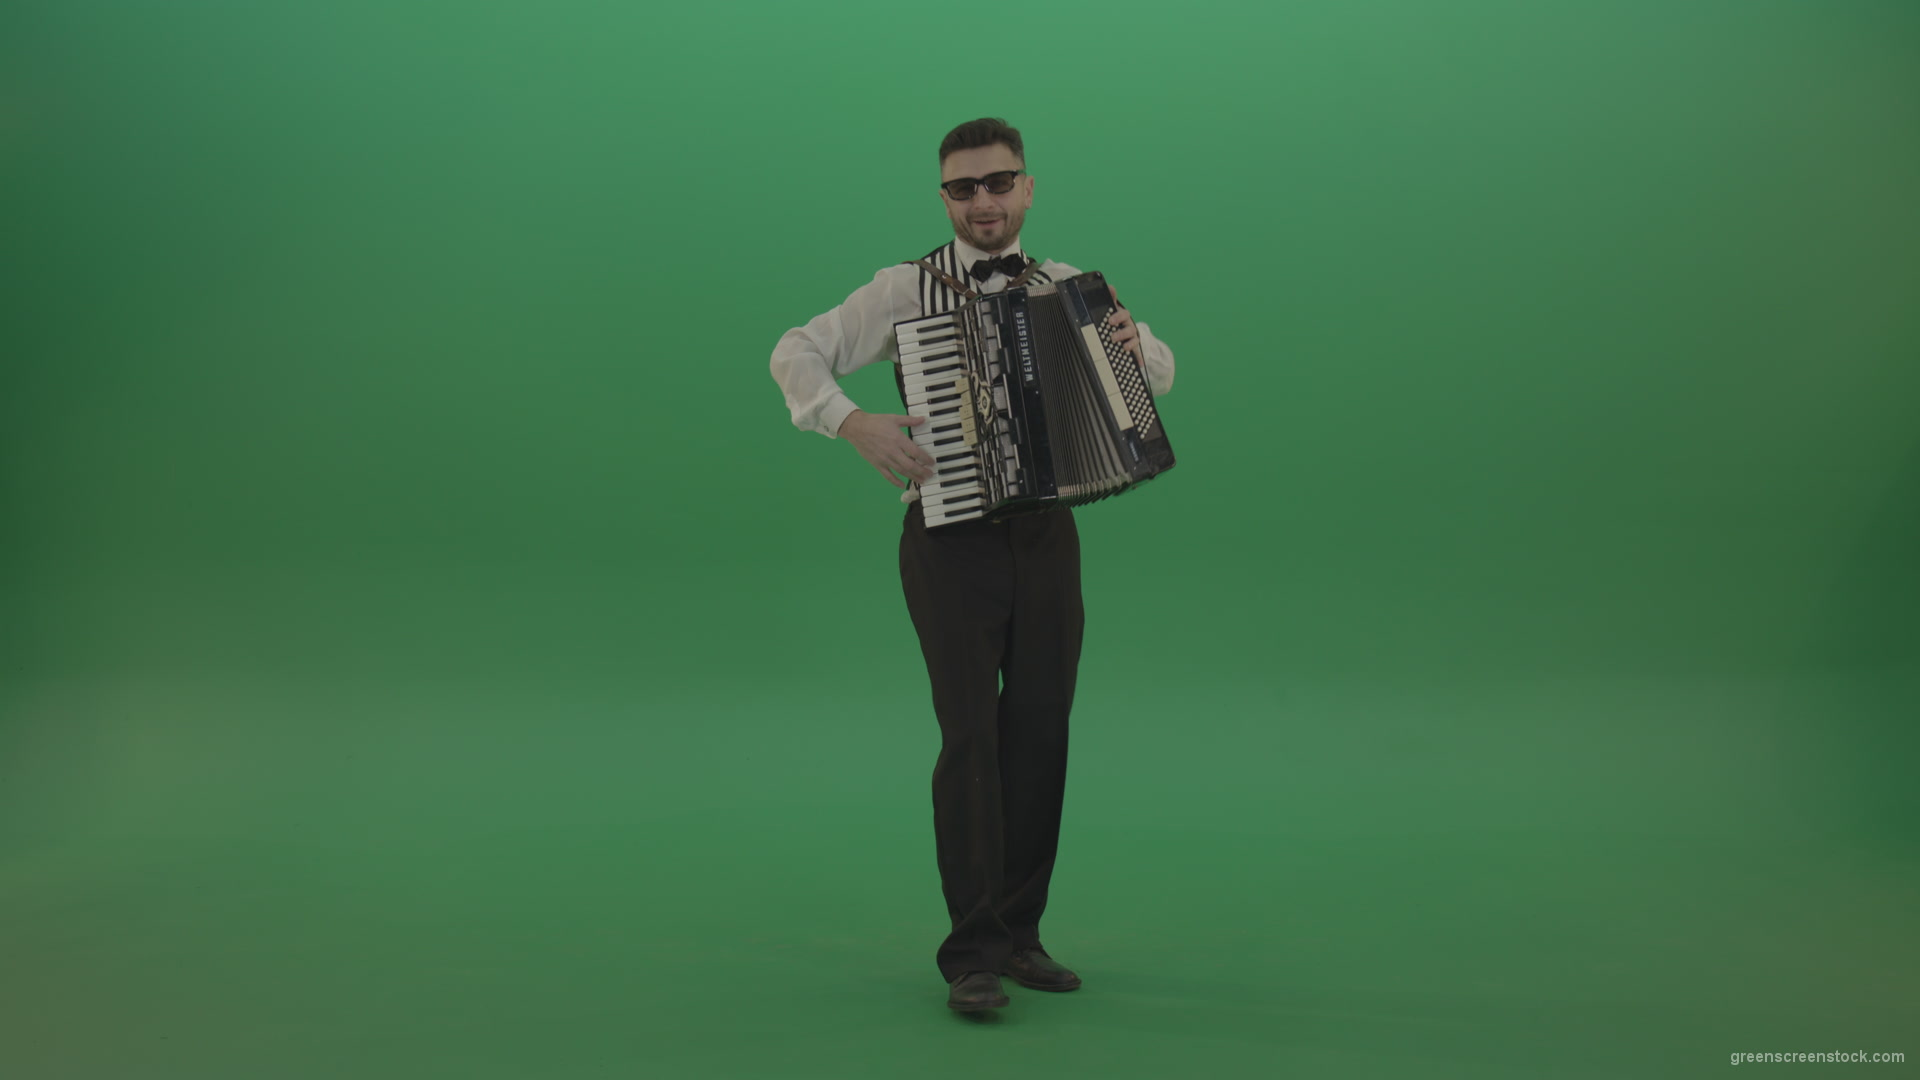 Full-sized-man-playing-Accordions-isolated-on-green-screen_006 Green Screen Stock